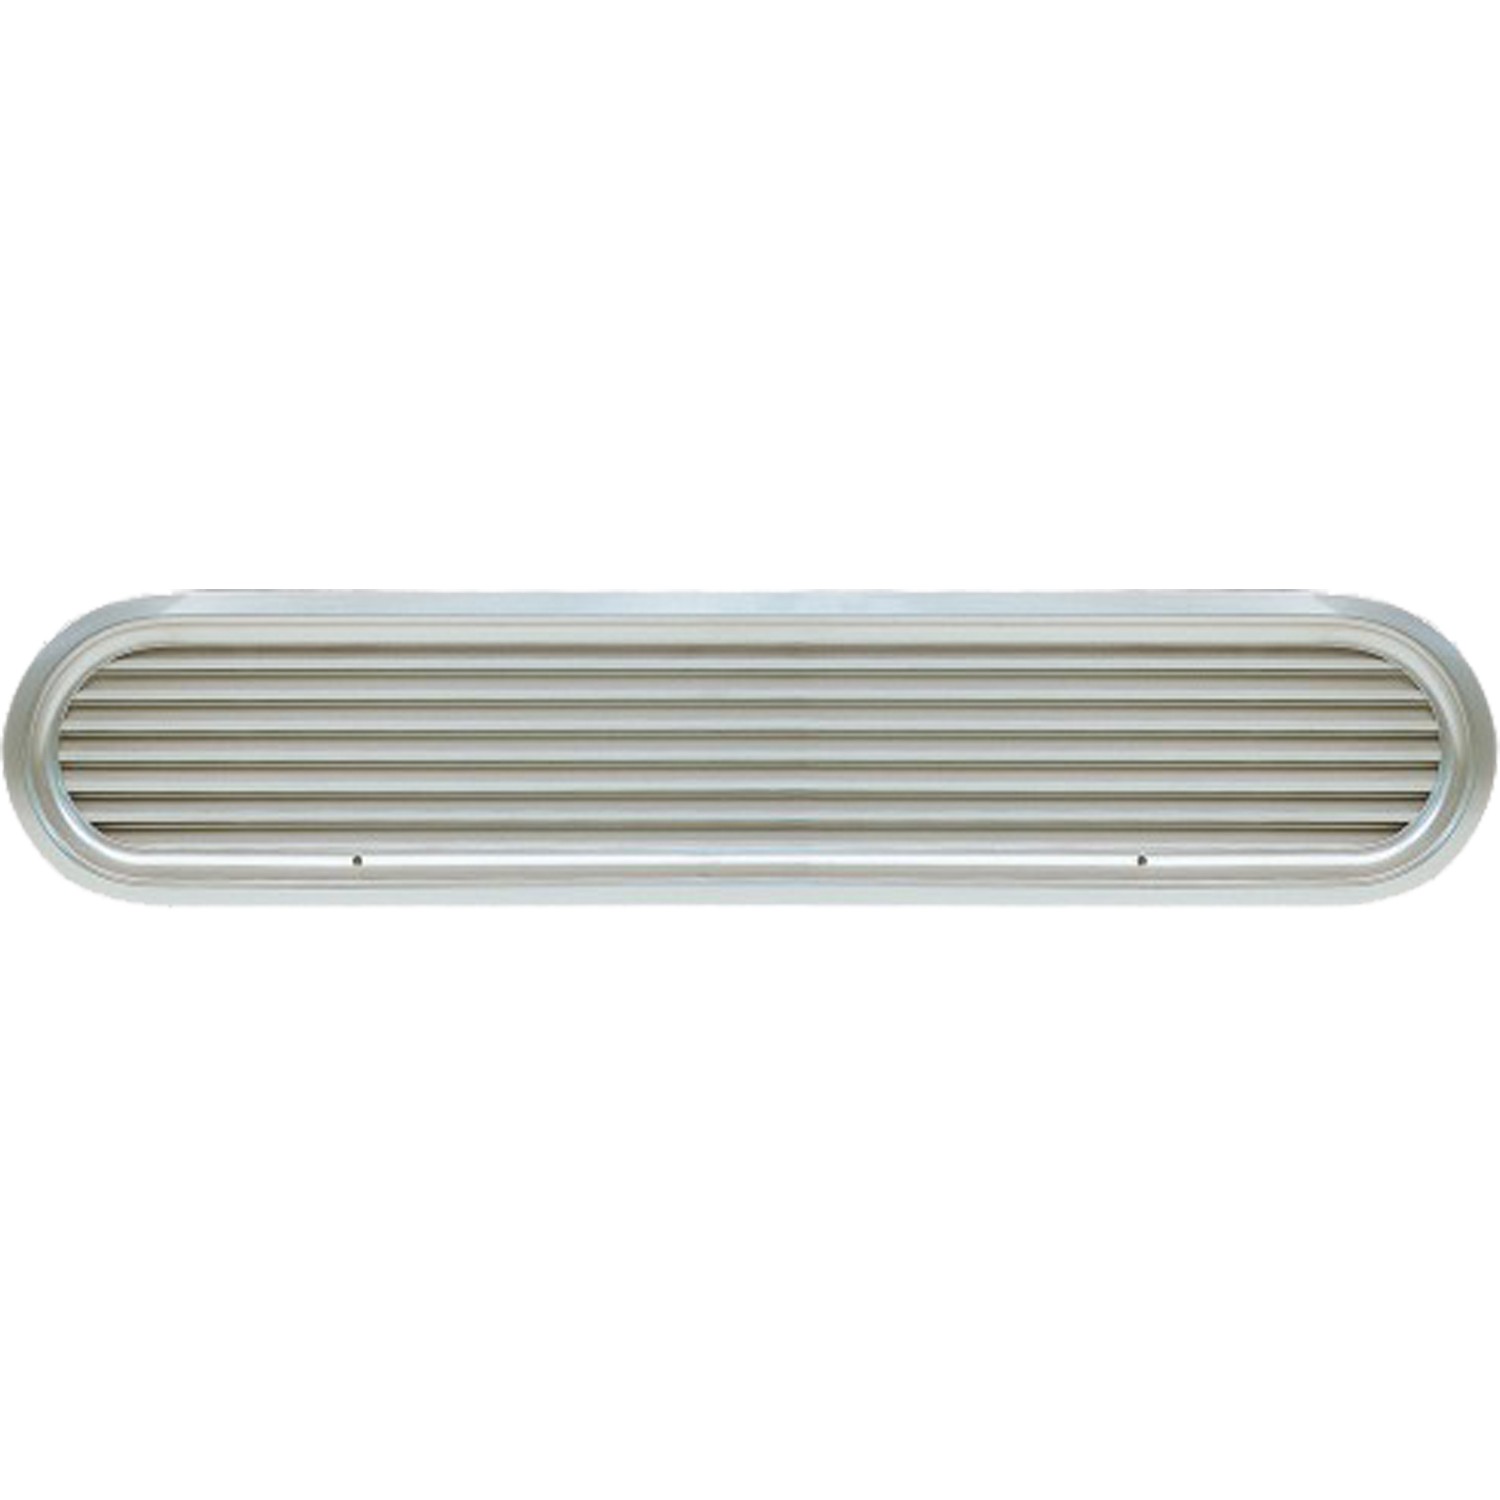 Aluminium Ventilation Grille Web Plate Heater Lid Stainless Steel Look 150mm x 300mm 